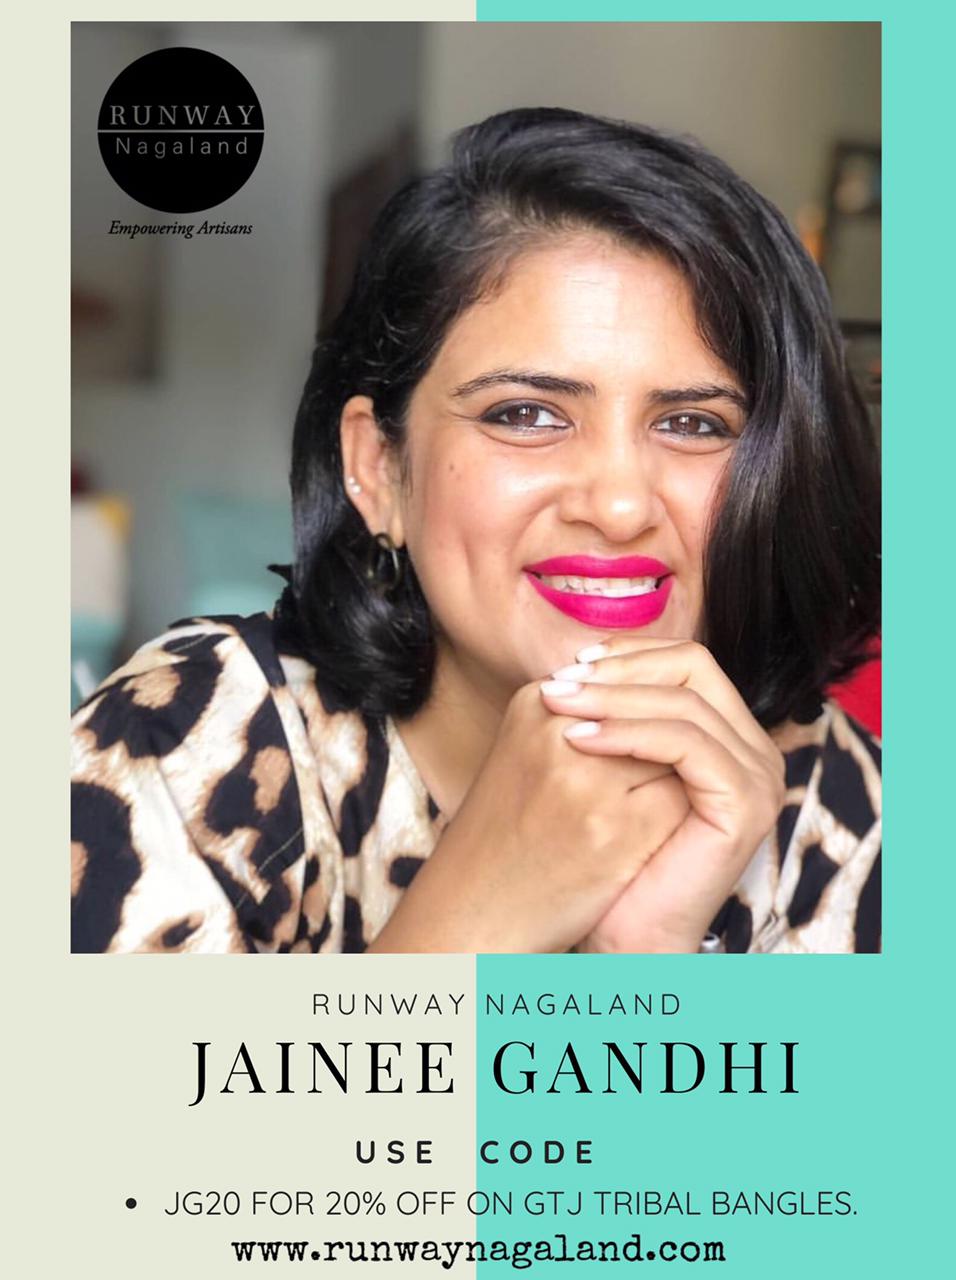 IN COLLABORATION WITH THE STYLE CURATOR - JAINEE GANDHI